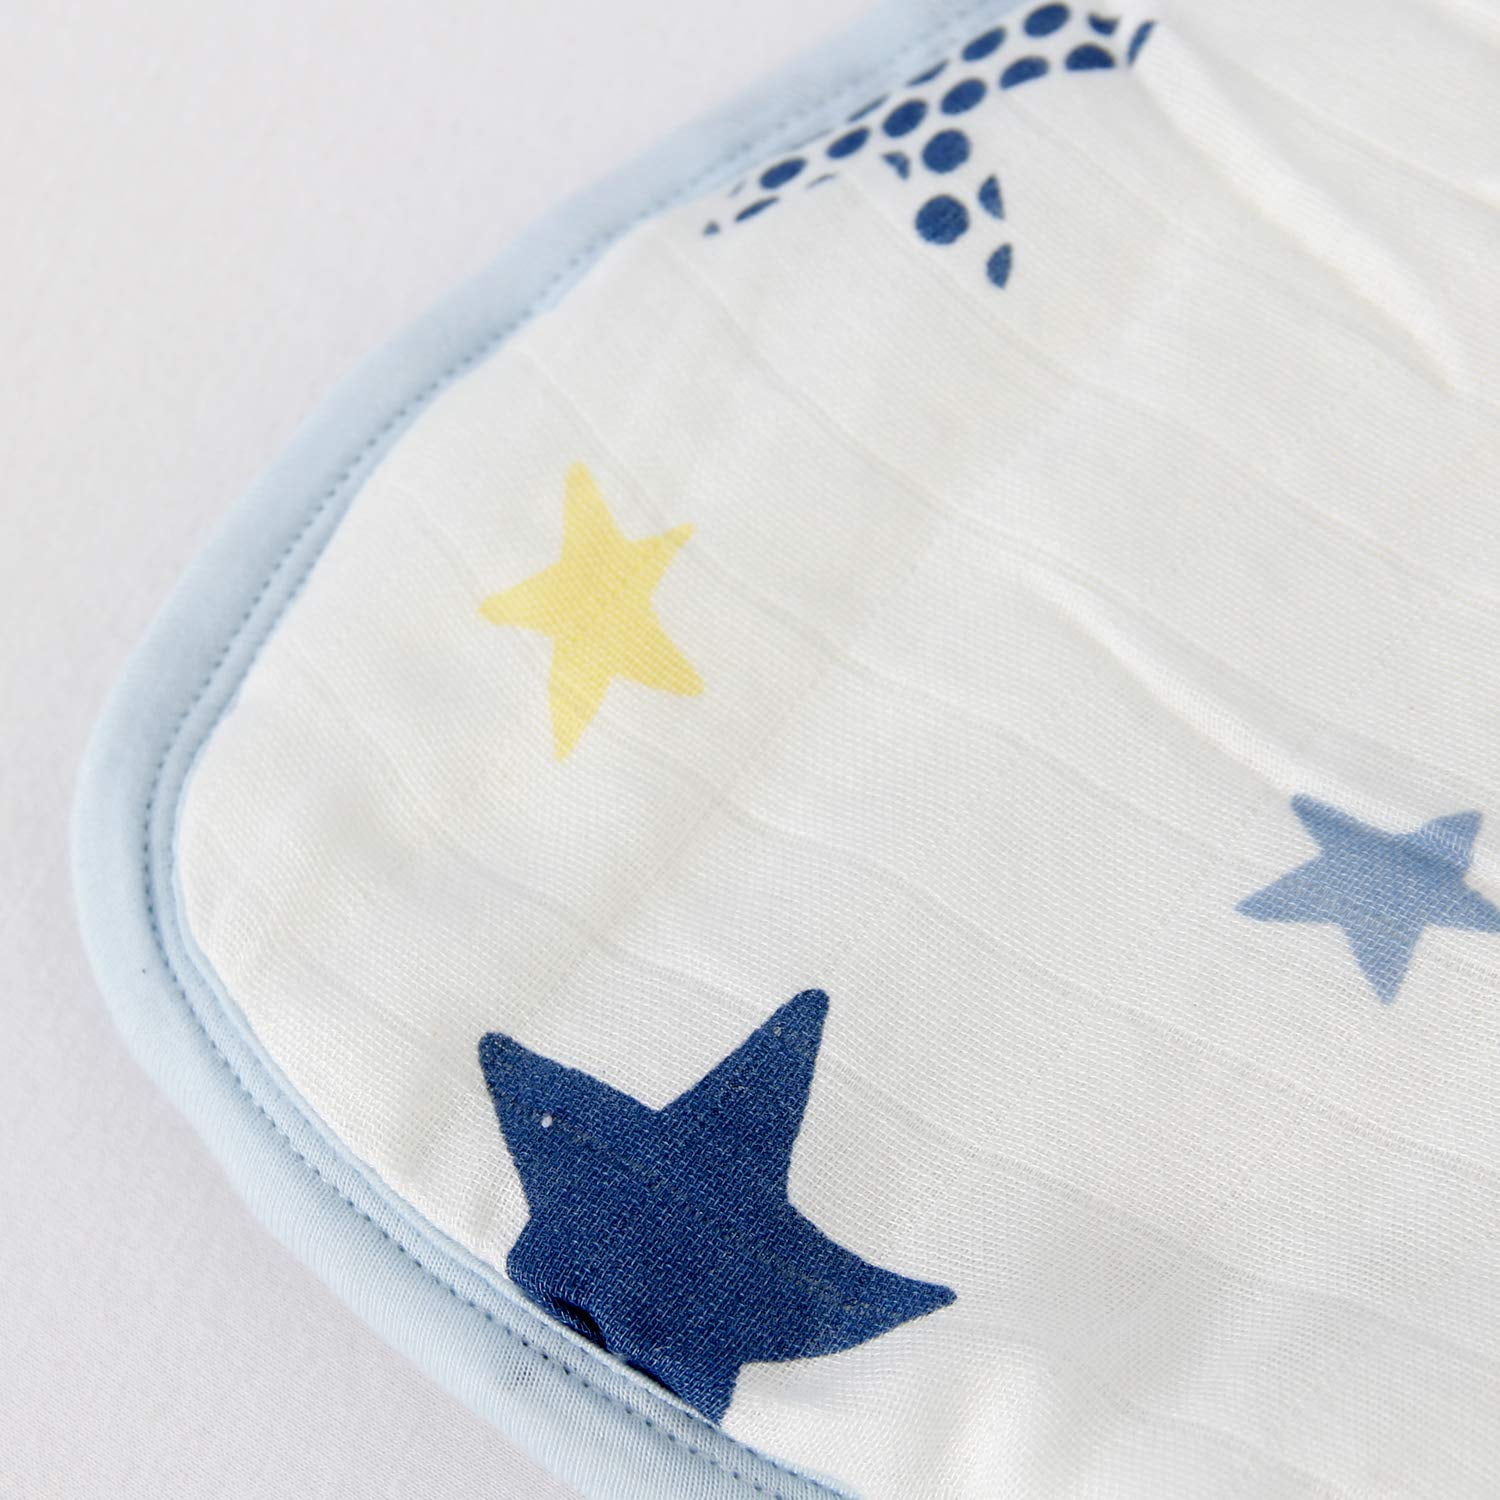 Molis & co Premium Muslin Baby Sleeping Bag and Sack, 2.5 TOG,Super Soft  and Warm Unisex Wearable Blanket, 18-36 Months. 35.8, Ideal for Winter.  Unisex Bunny and Balloons Print in Blue 